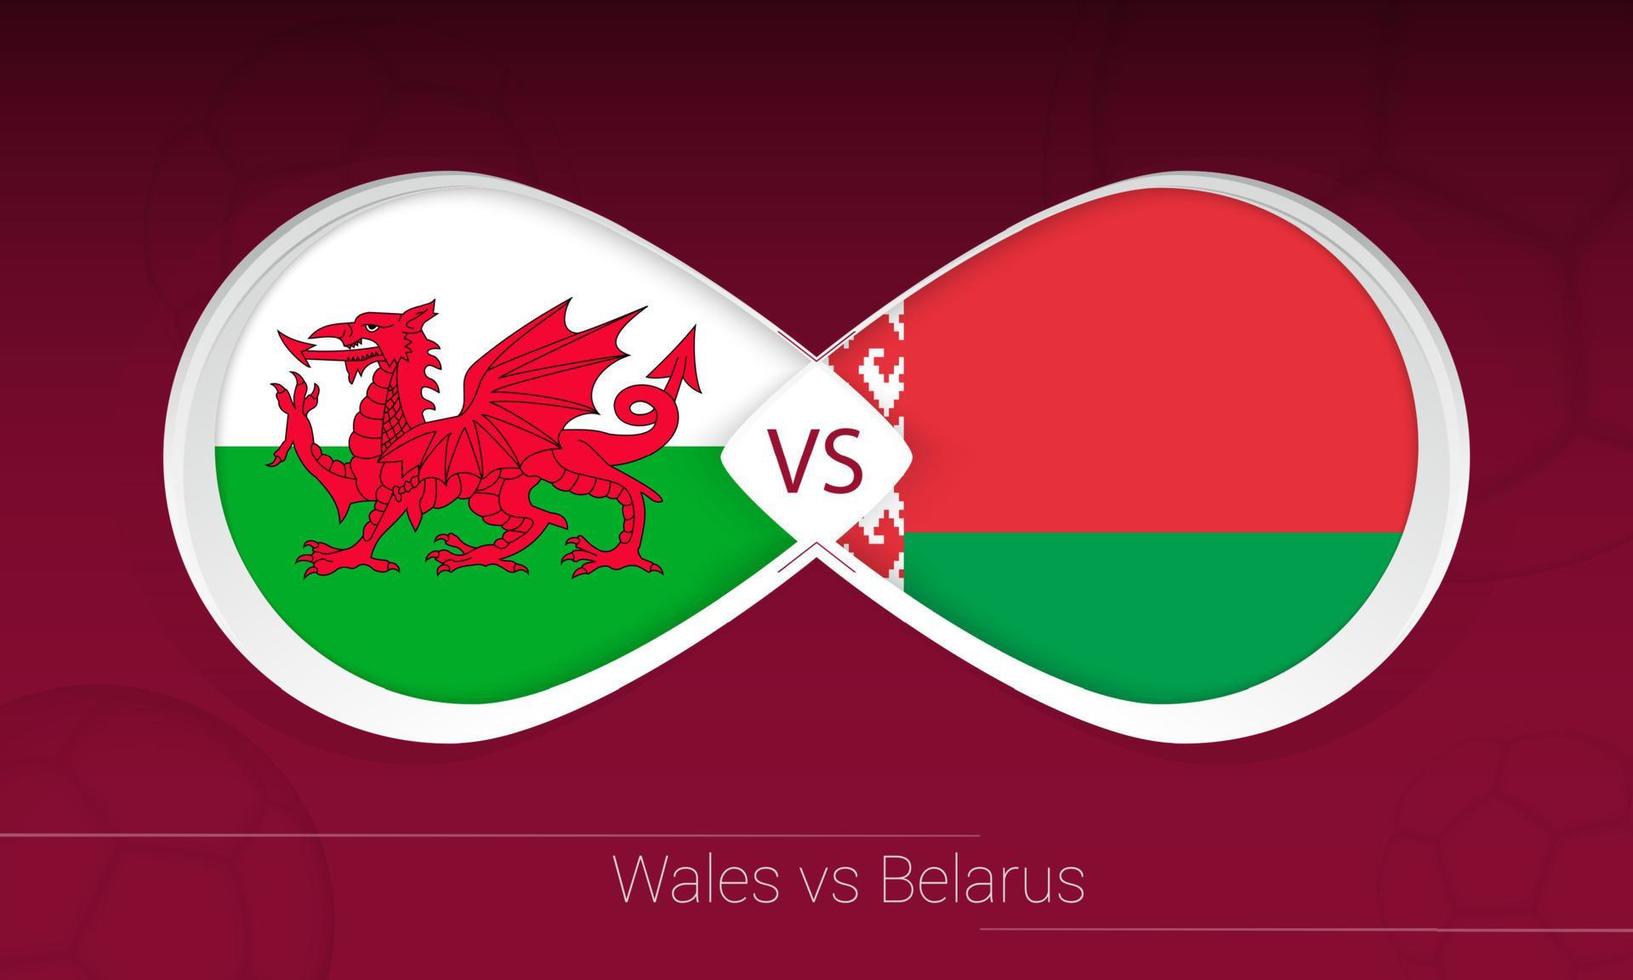 Wales vs Belarus in Football Competition, Group E. Versus icon on Football background. vector